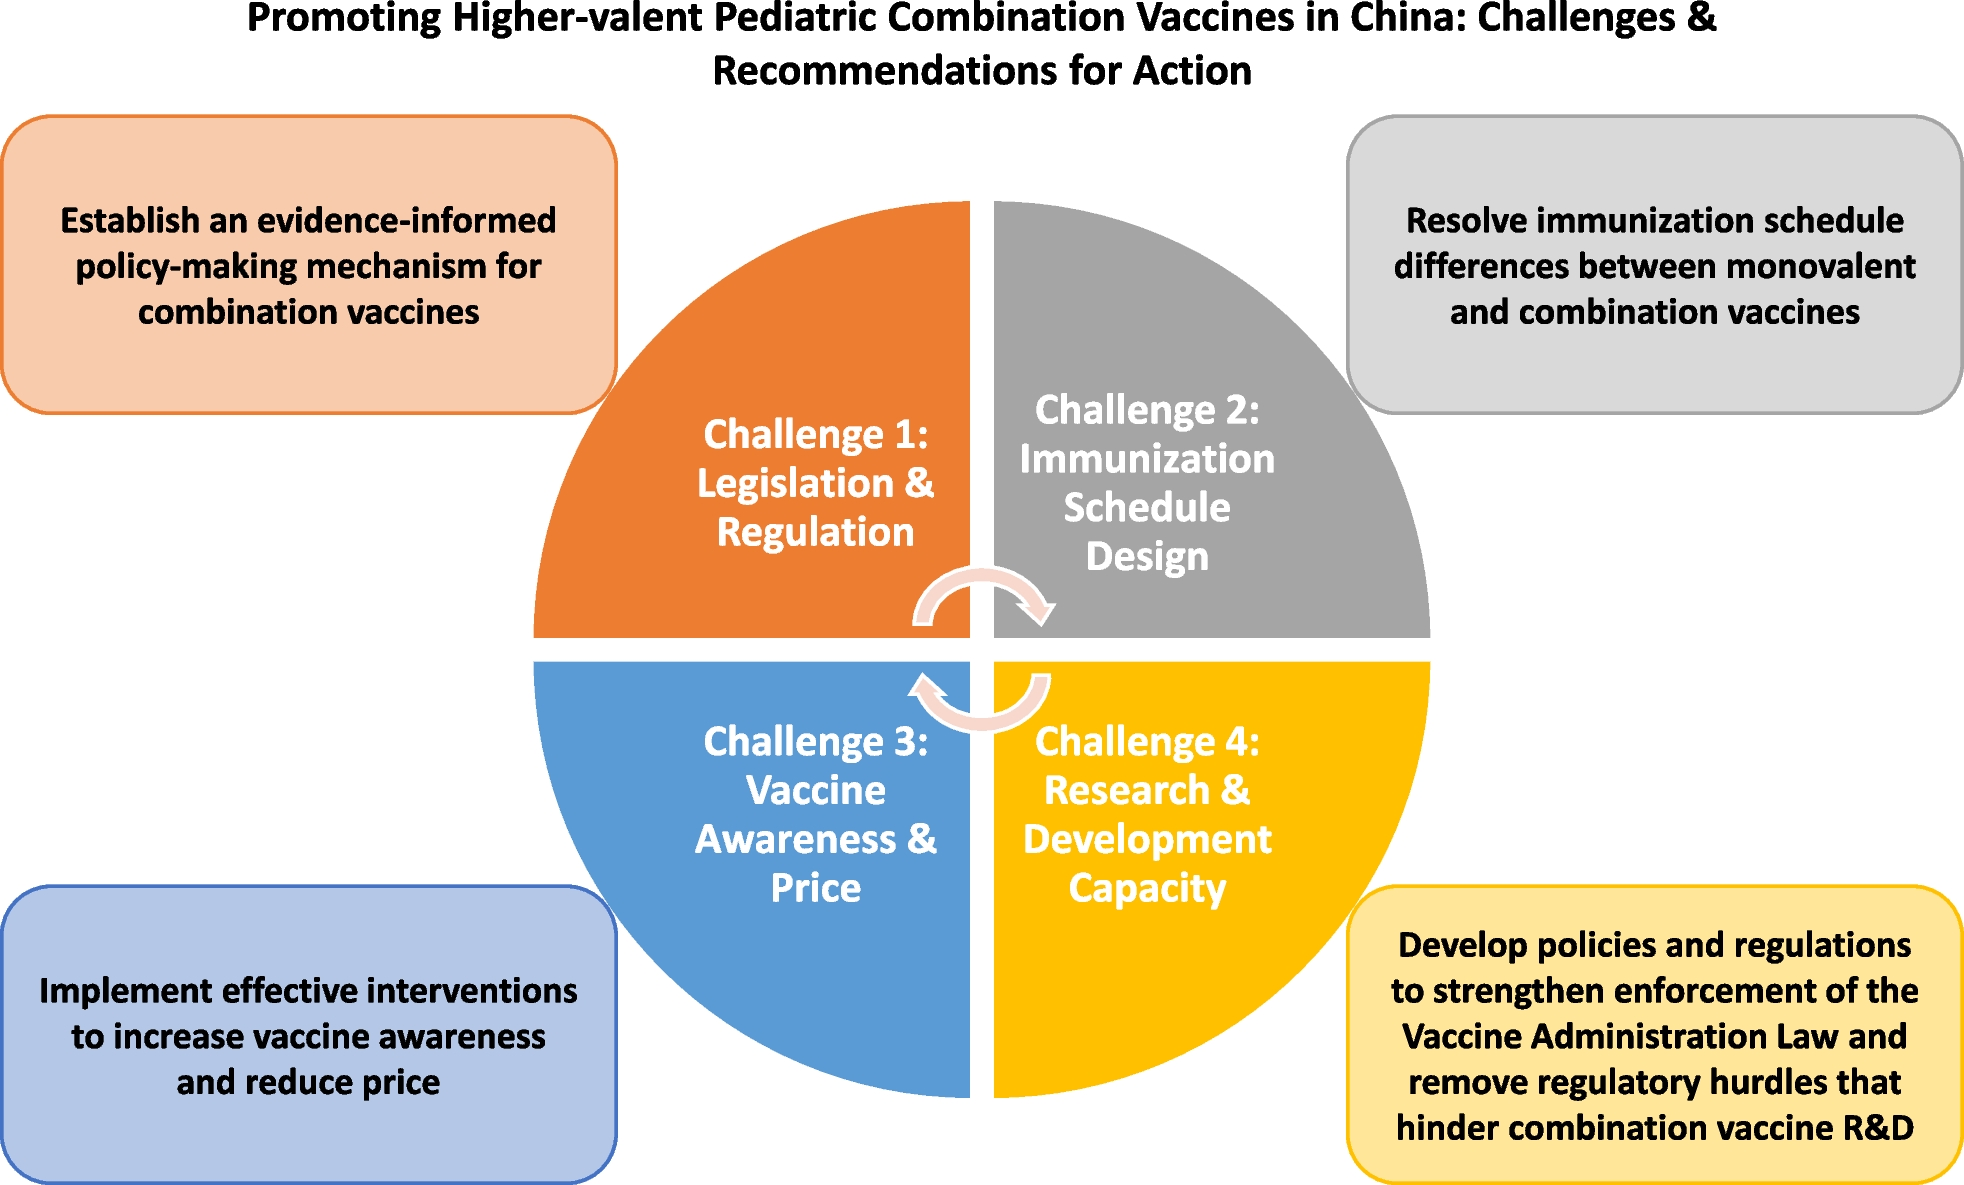 Promoting higher-valent pediatric combination vaccines in China: challenges and recommendations for action